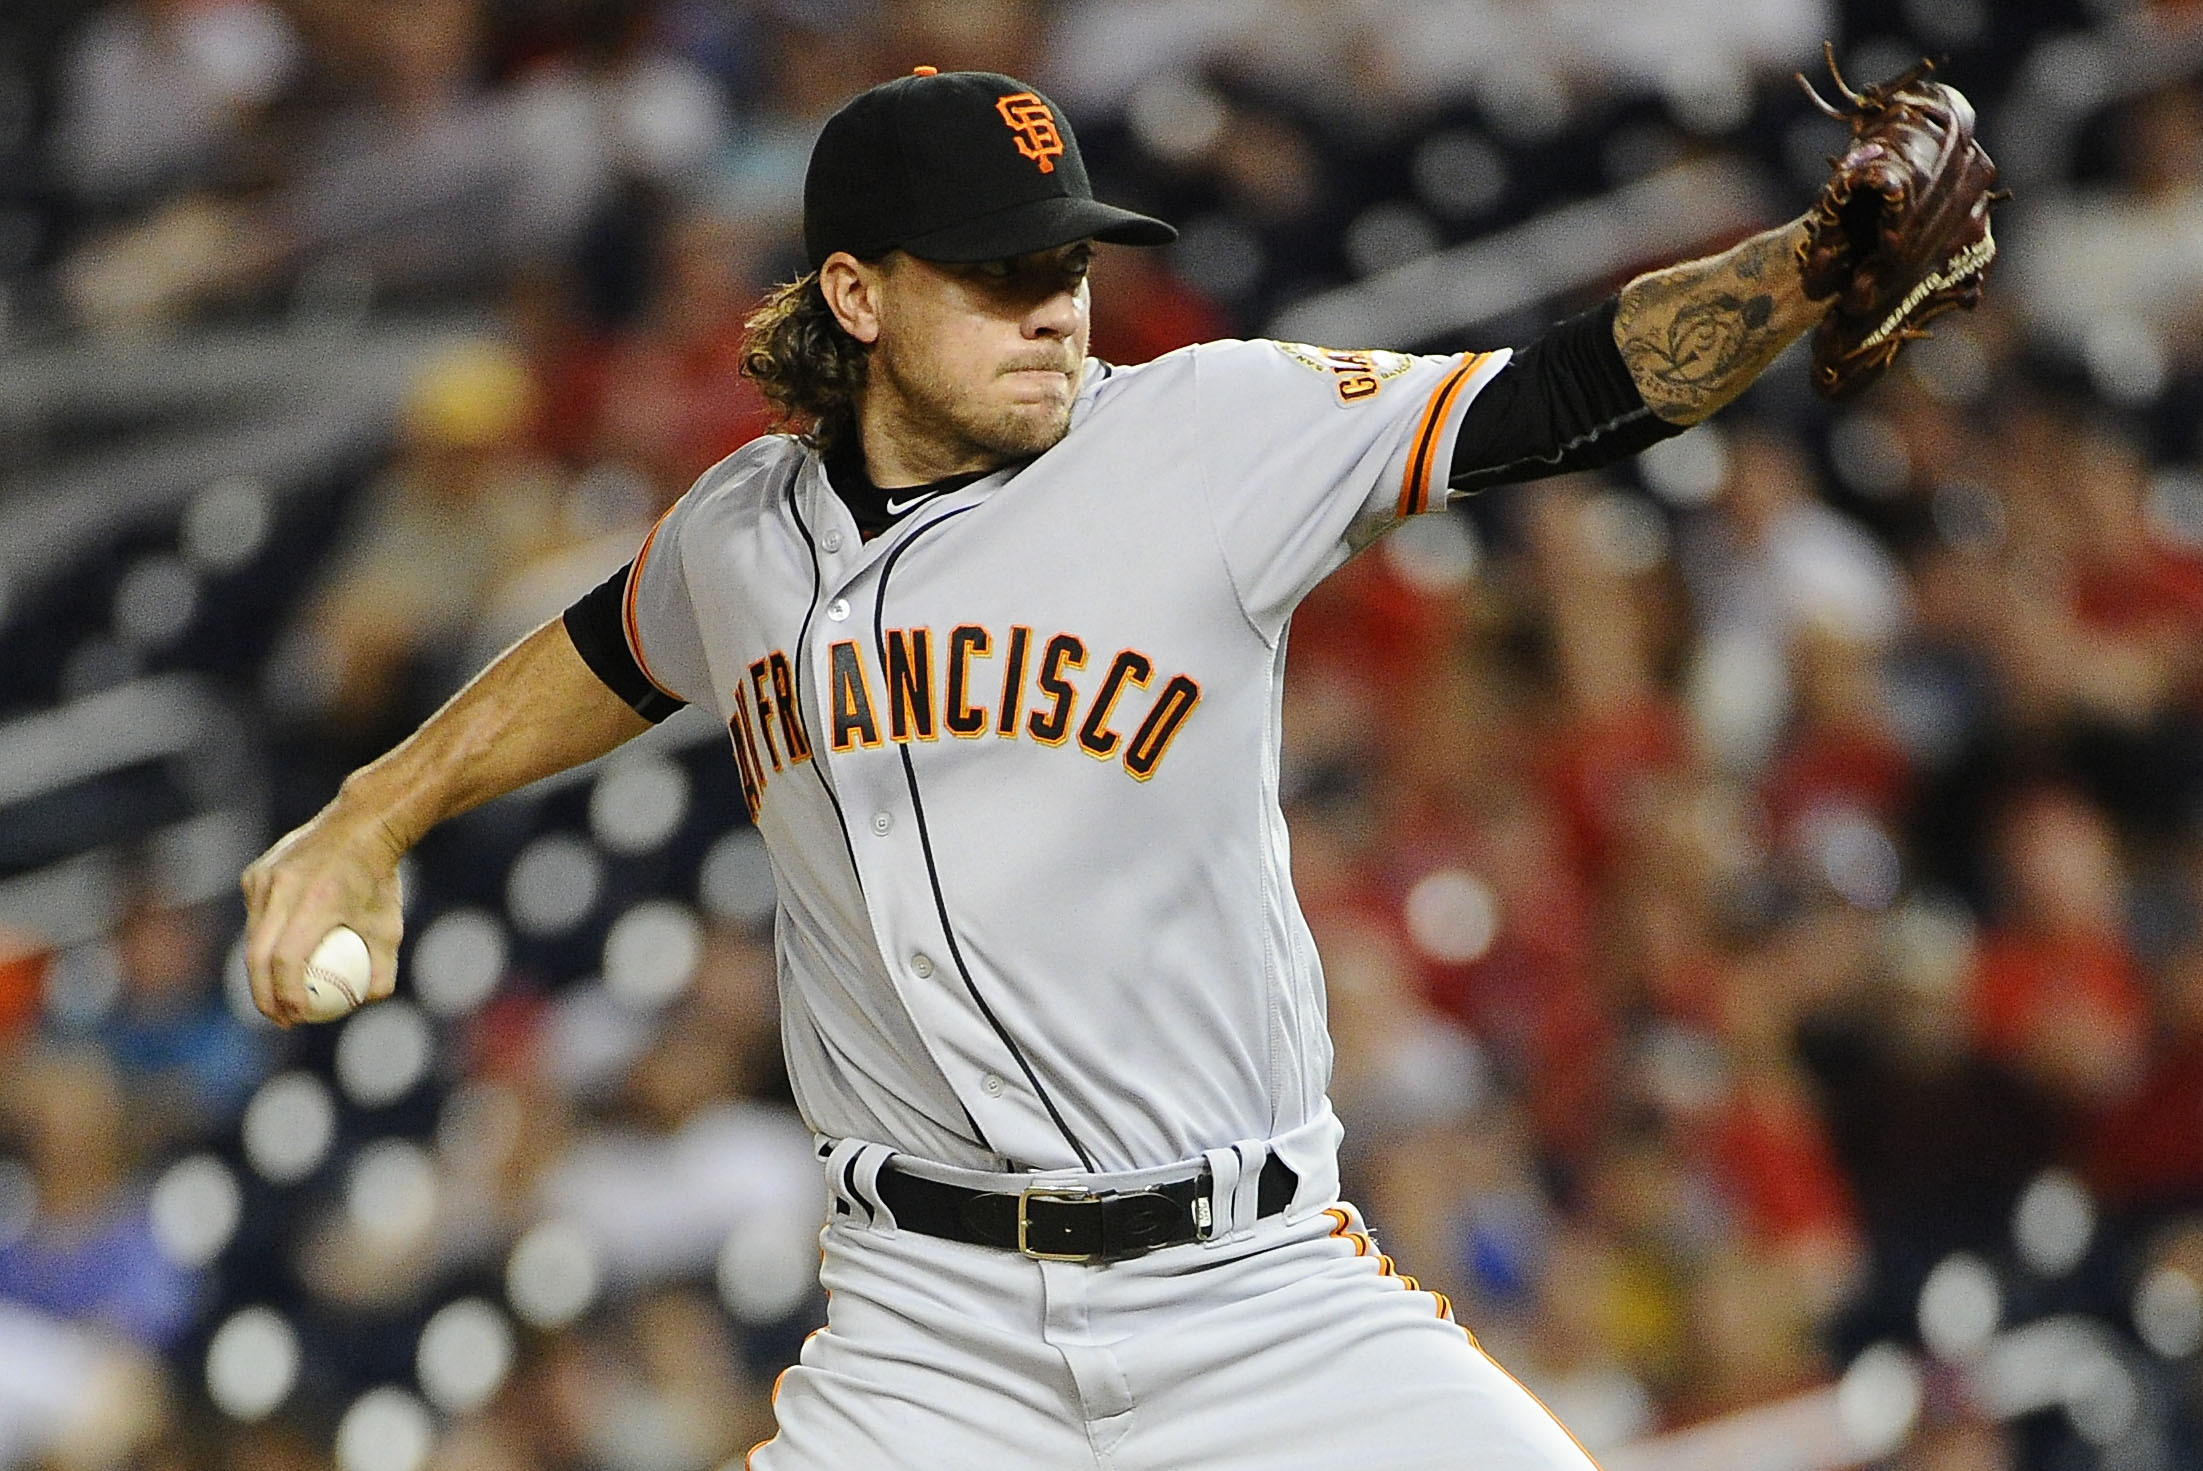 Jake Peavy threw his 14th career complete game Saturday - NBC Sports